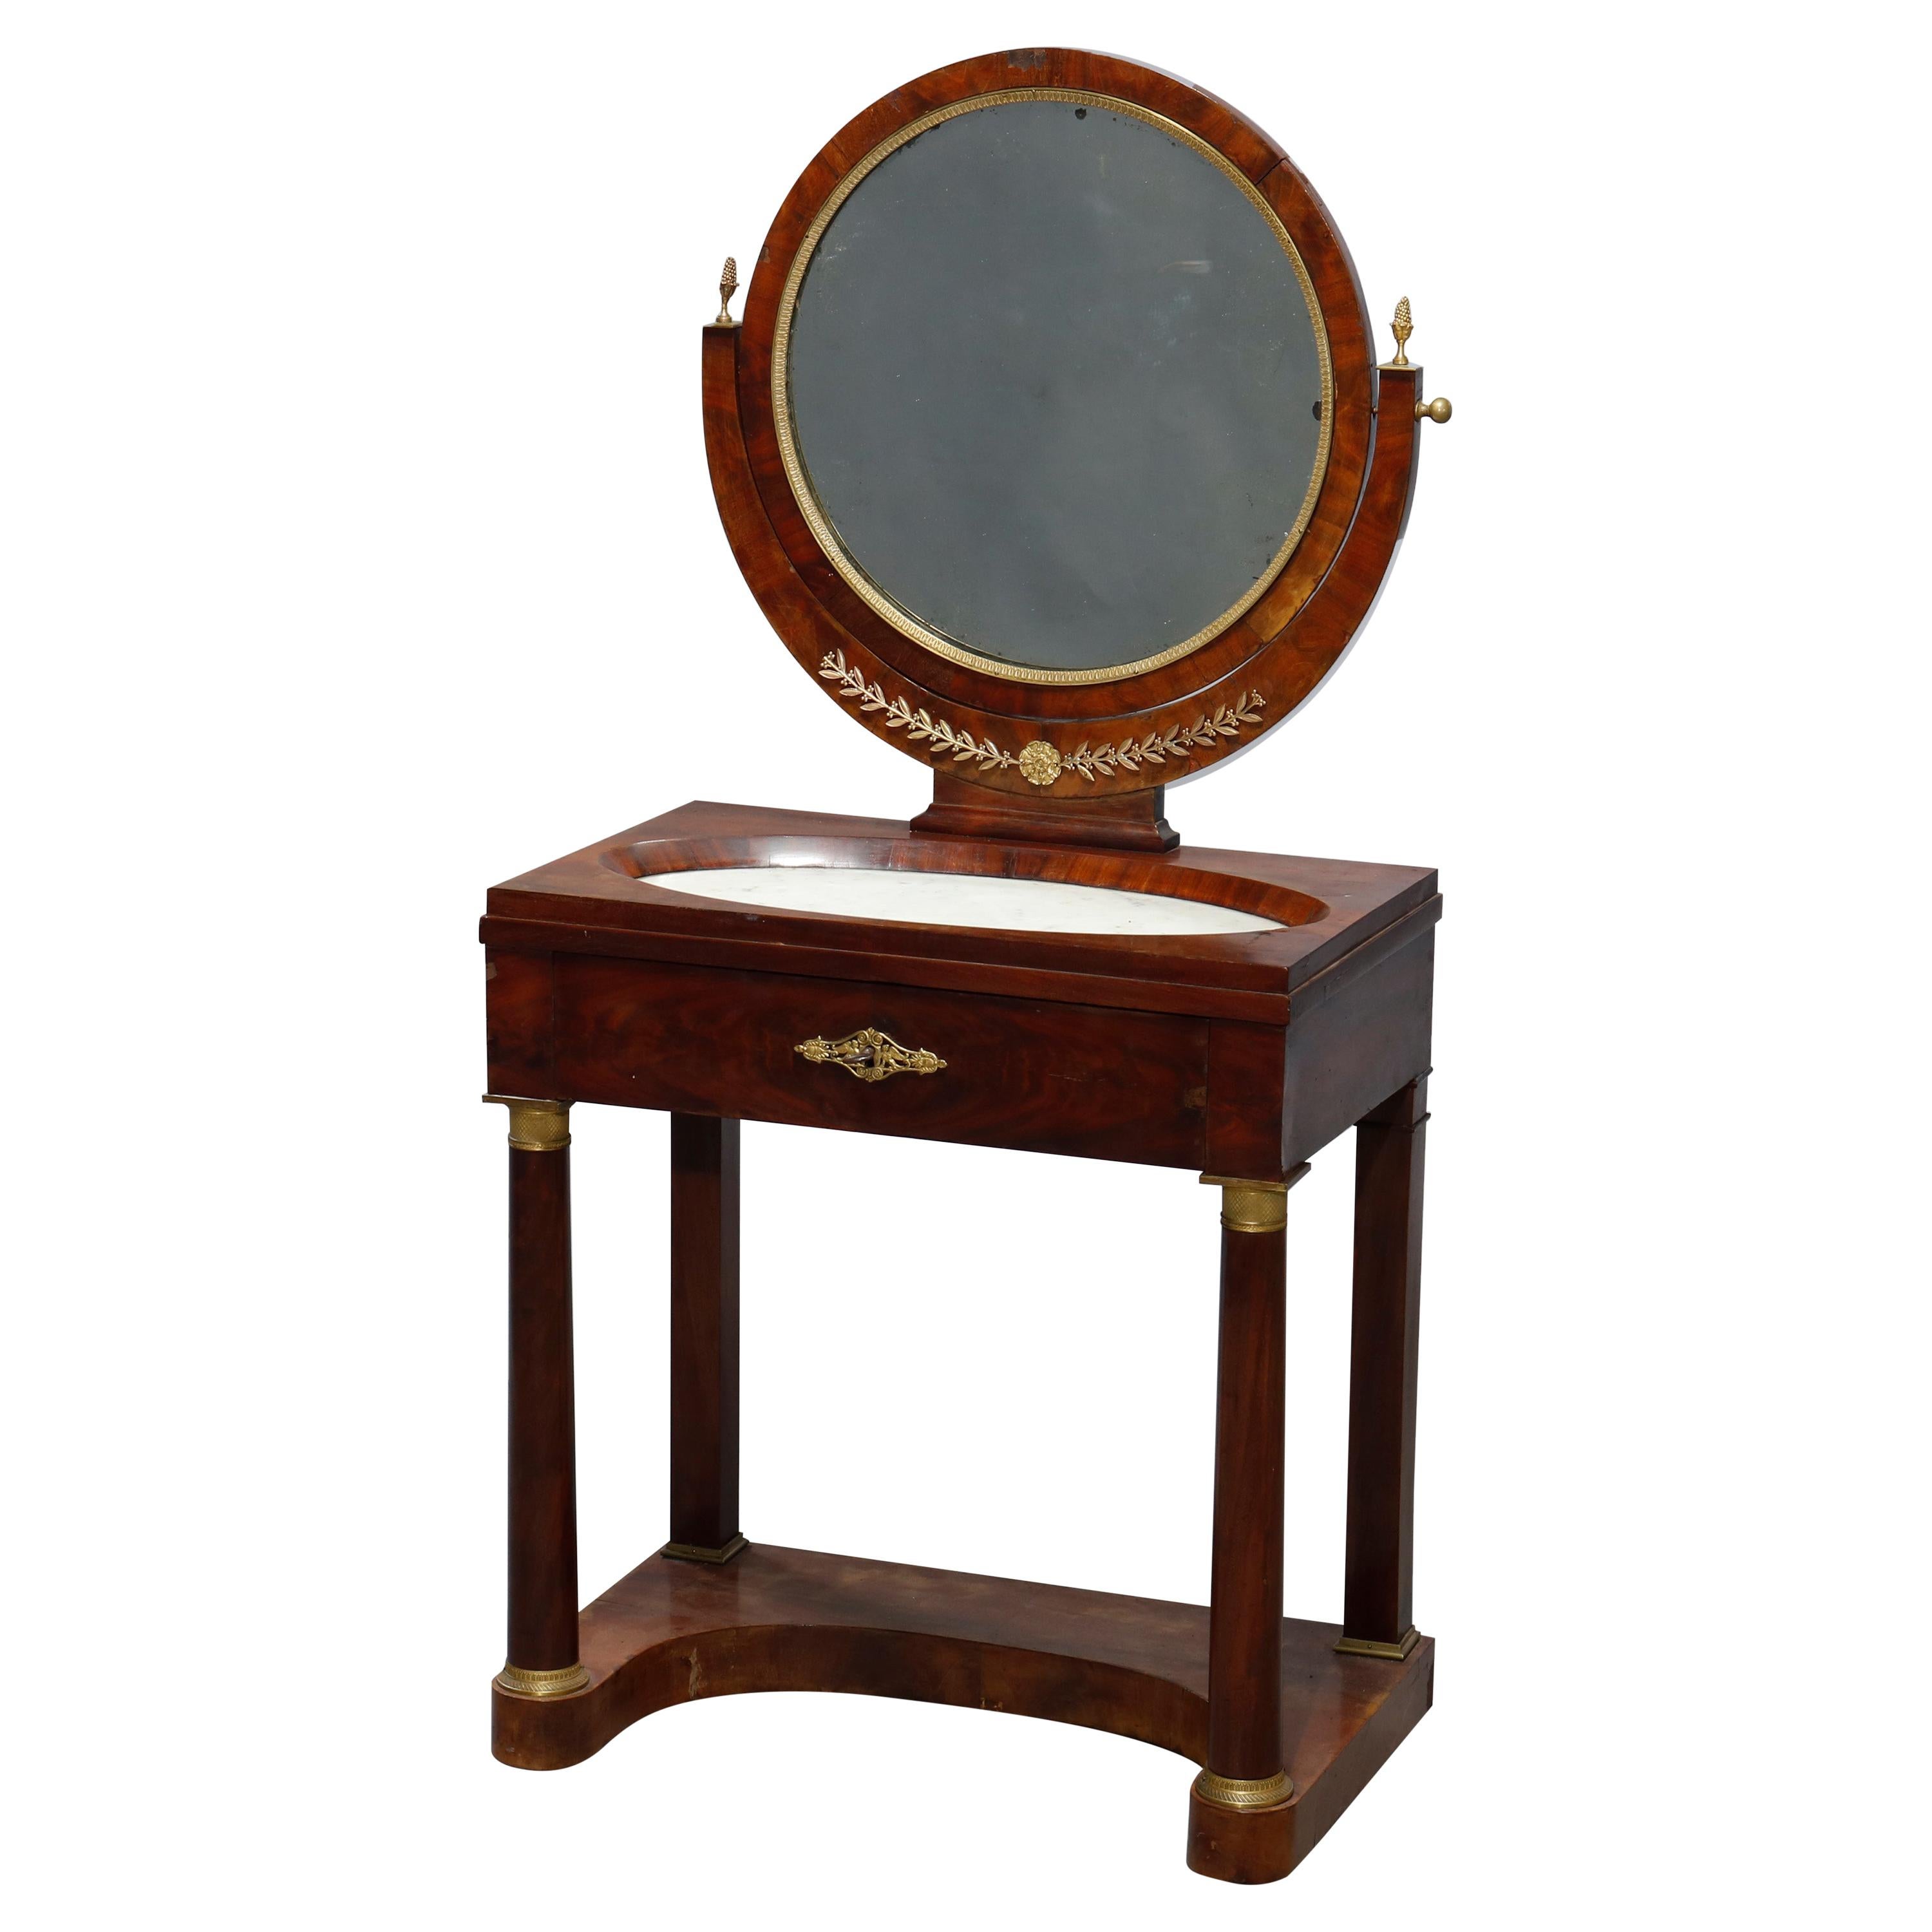 Antique French Empire Flame Mahogany & Ormolu Marble-Top Dressing Table, c 1810